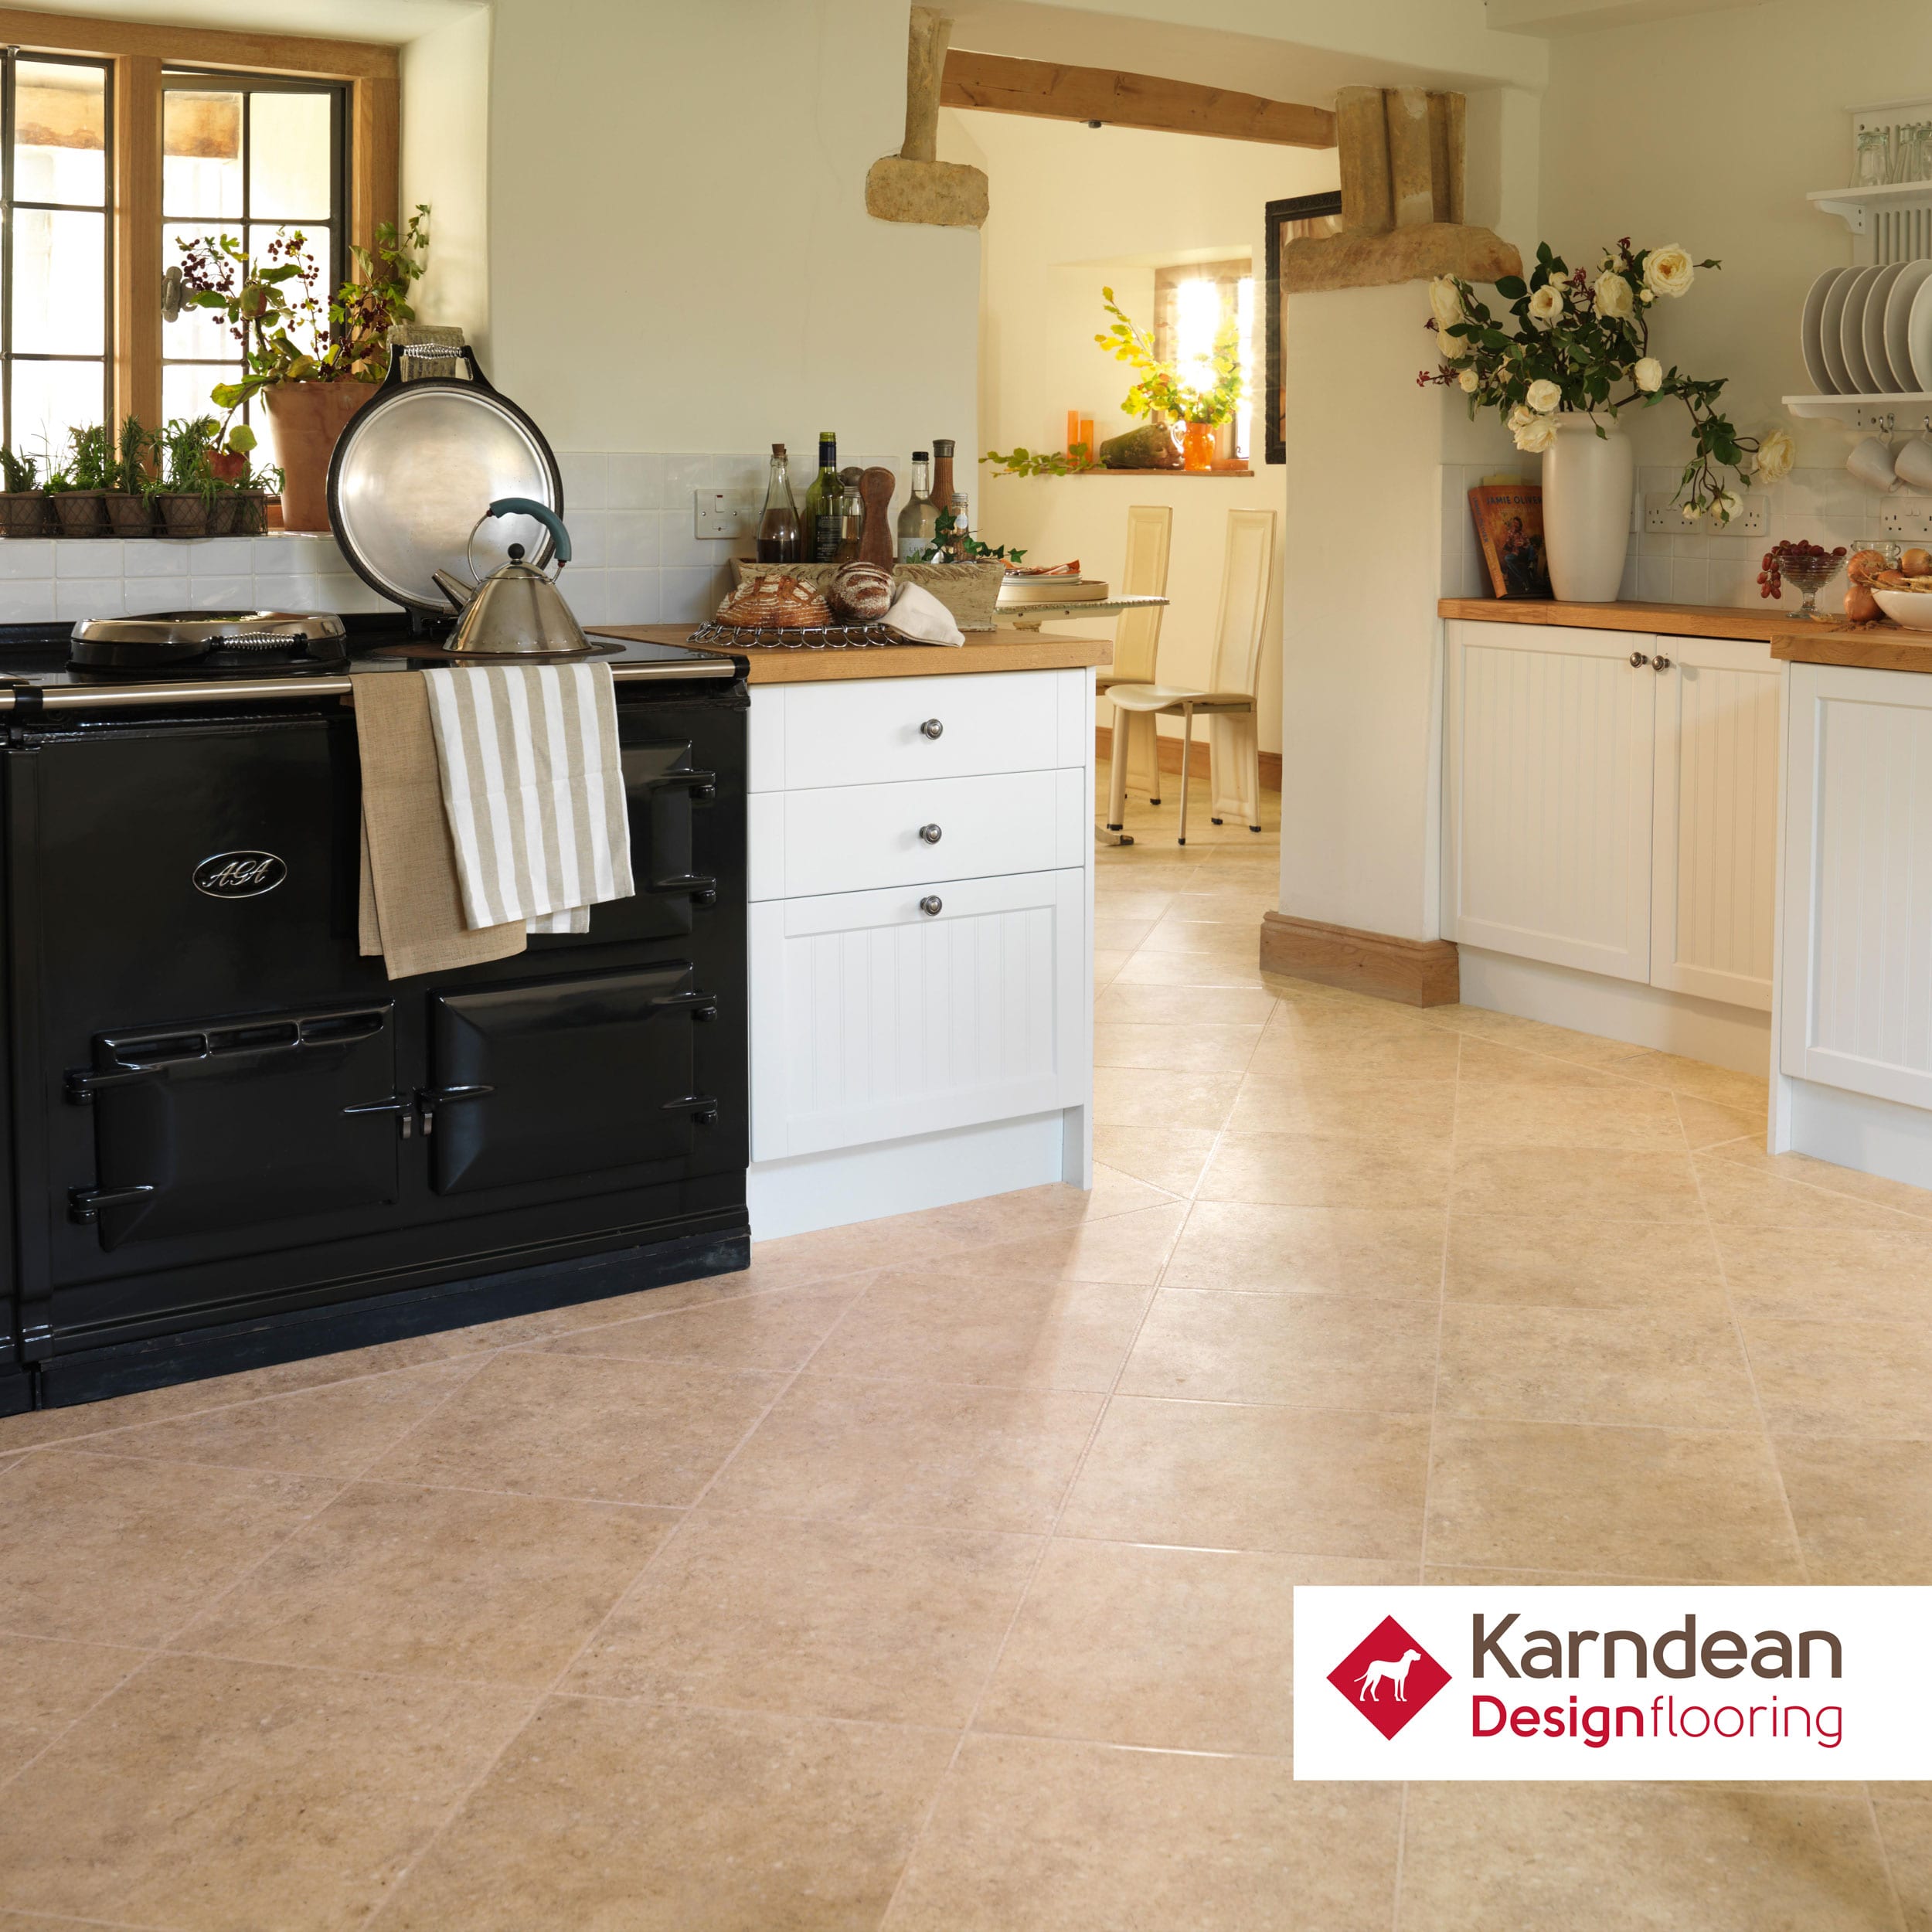 Karndean, the luxurious alternative to laminate, wooden, and ceramic flooring